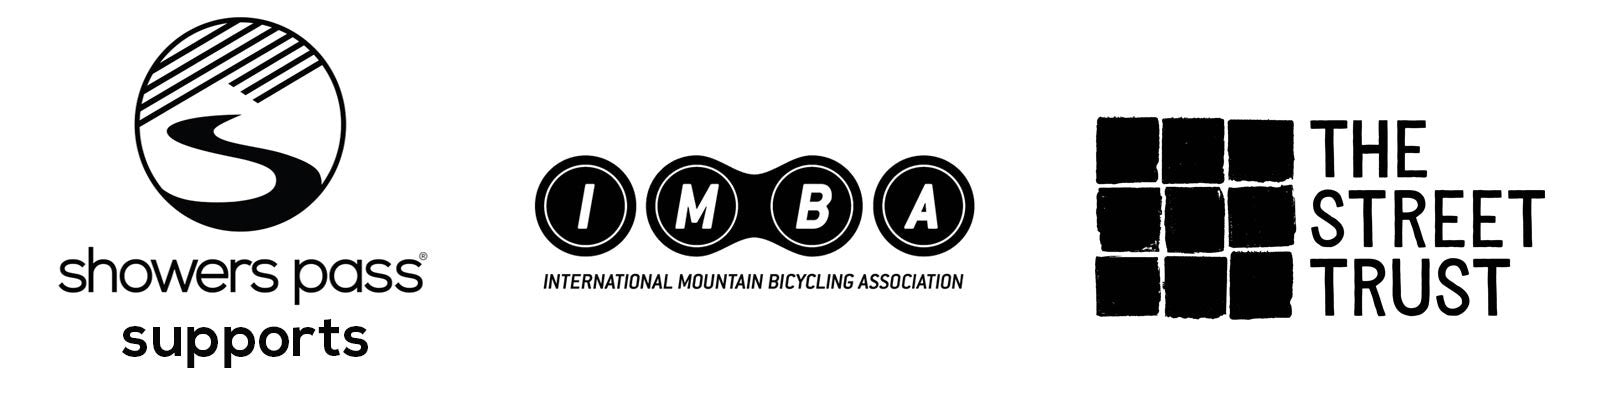 Showers Pass Supports IMBA and the Street Trust